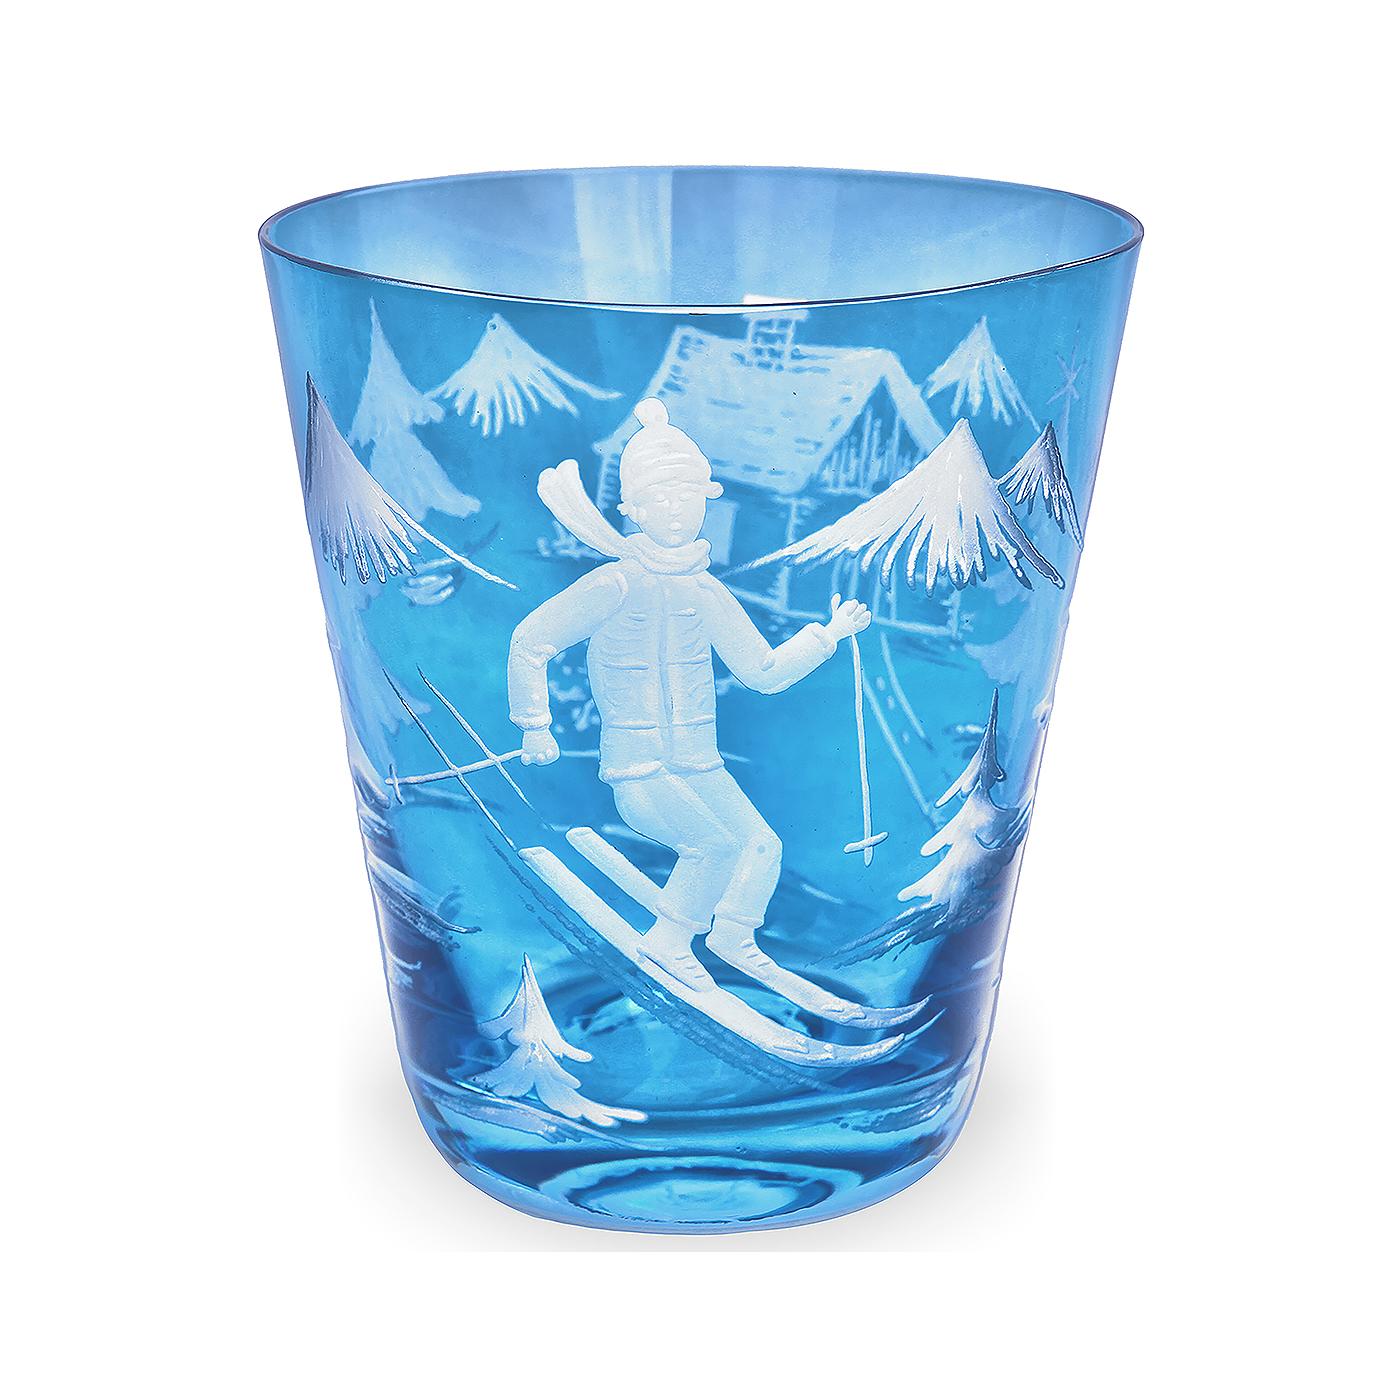 Set of six hand blown tumbler in blue crystal with a hand-edged skier decor. The country decor shows  a skier boy, trees and mountains and a chalet all-over the glass. A matching crystal carafe can be ordered in addition. We recommend handwashing.